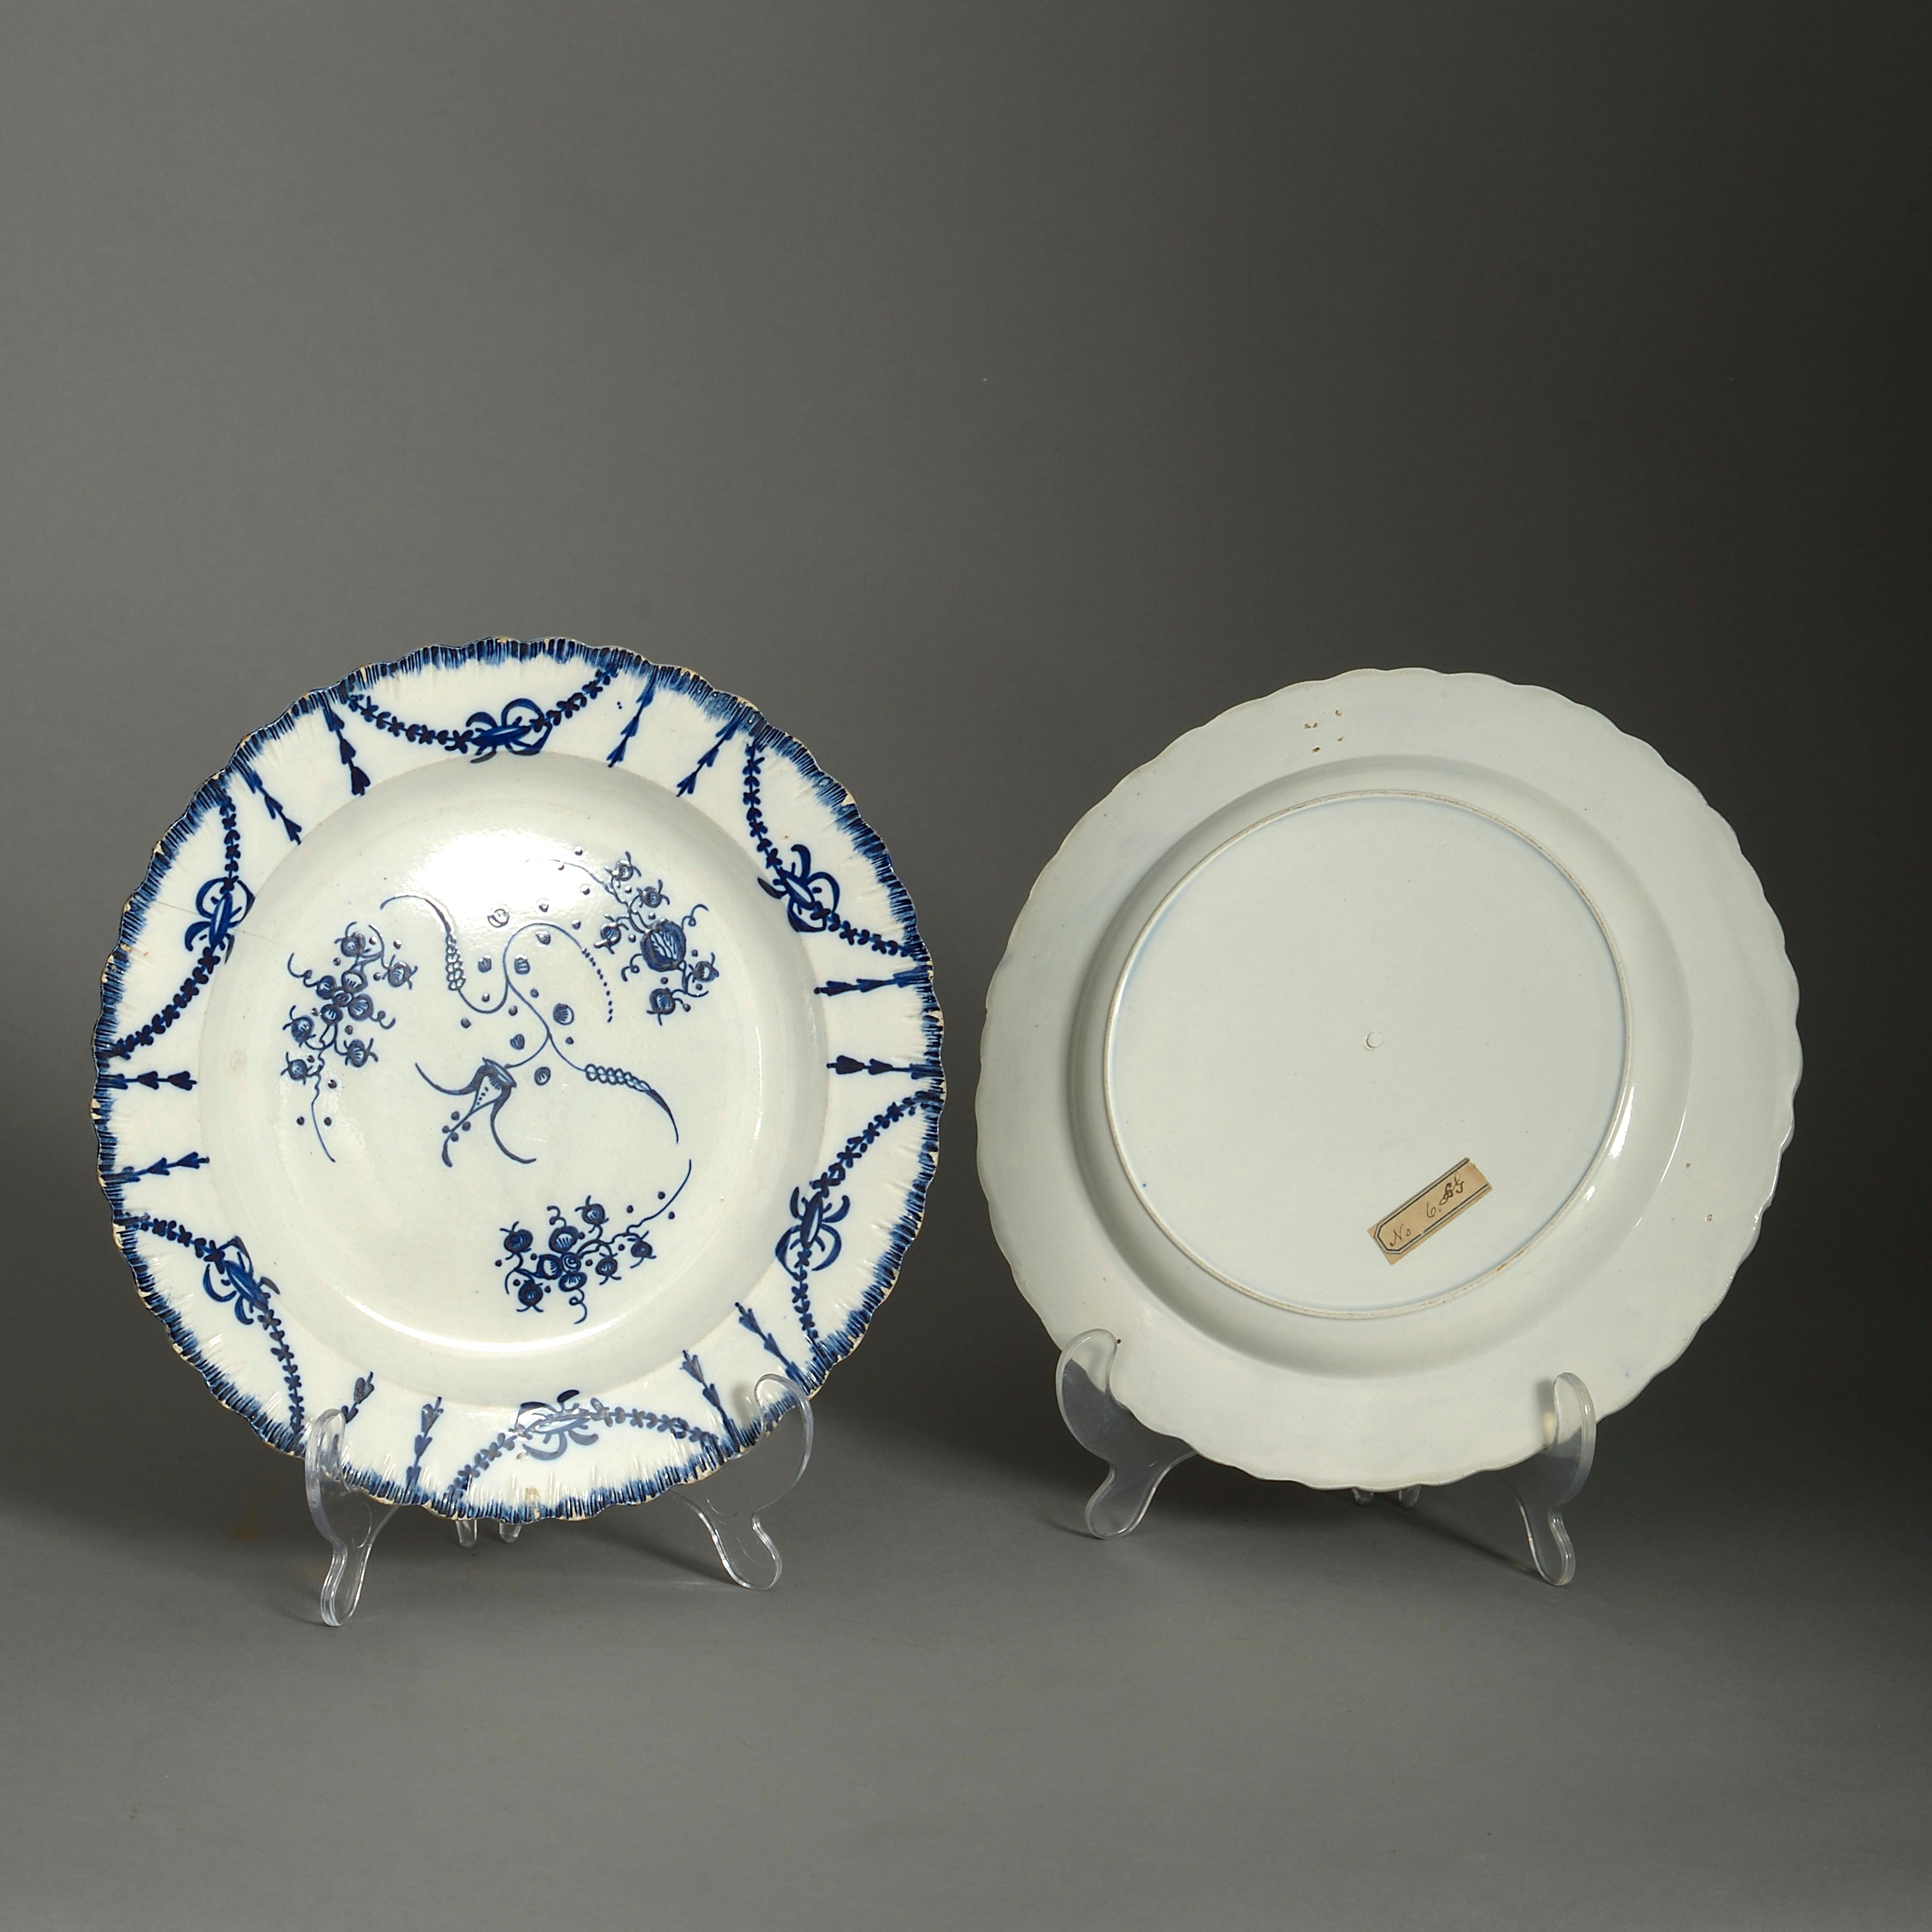 English Pair of Late 18th Century Blue and White Staffordshire Pottery Plates